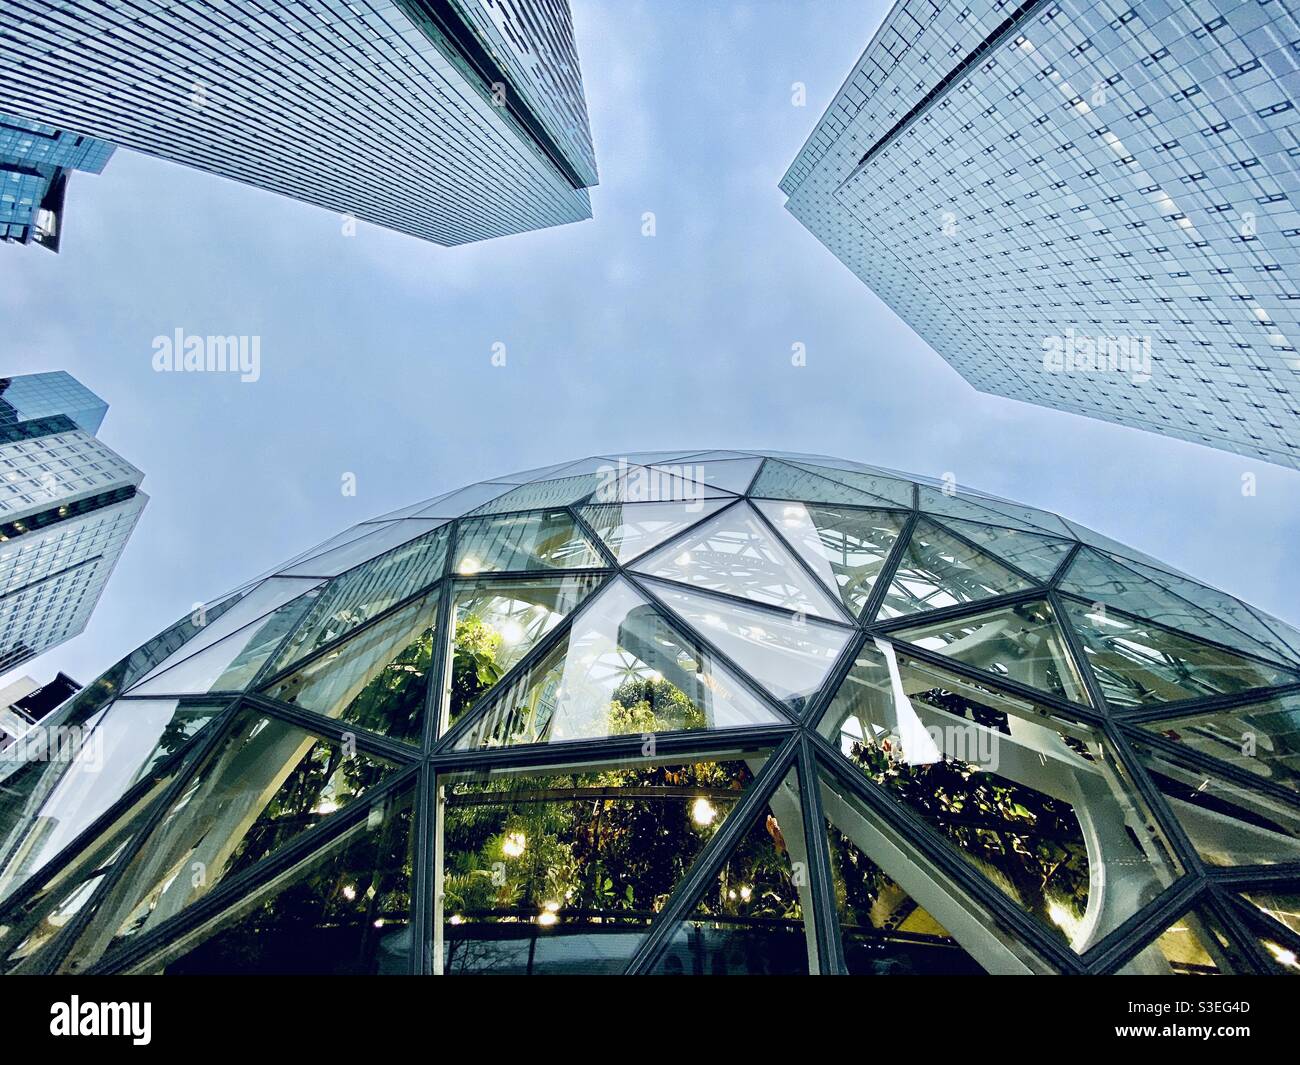 “The Spheres,” part of the iconic Amazon.com campus/headquarters in downtown Seattle, and surrounding newly constructed buildings Stock Photo